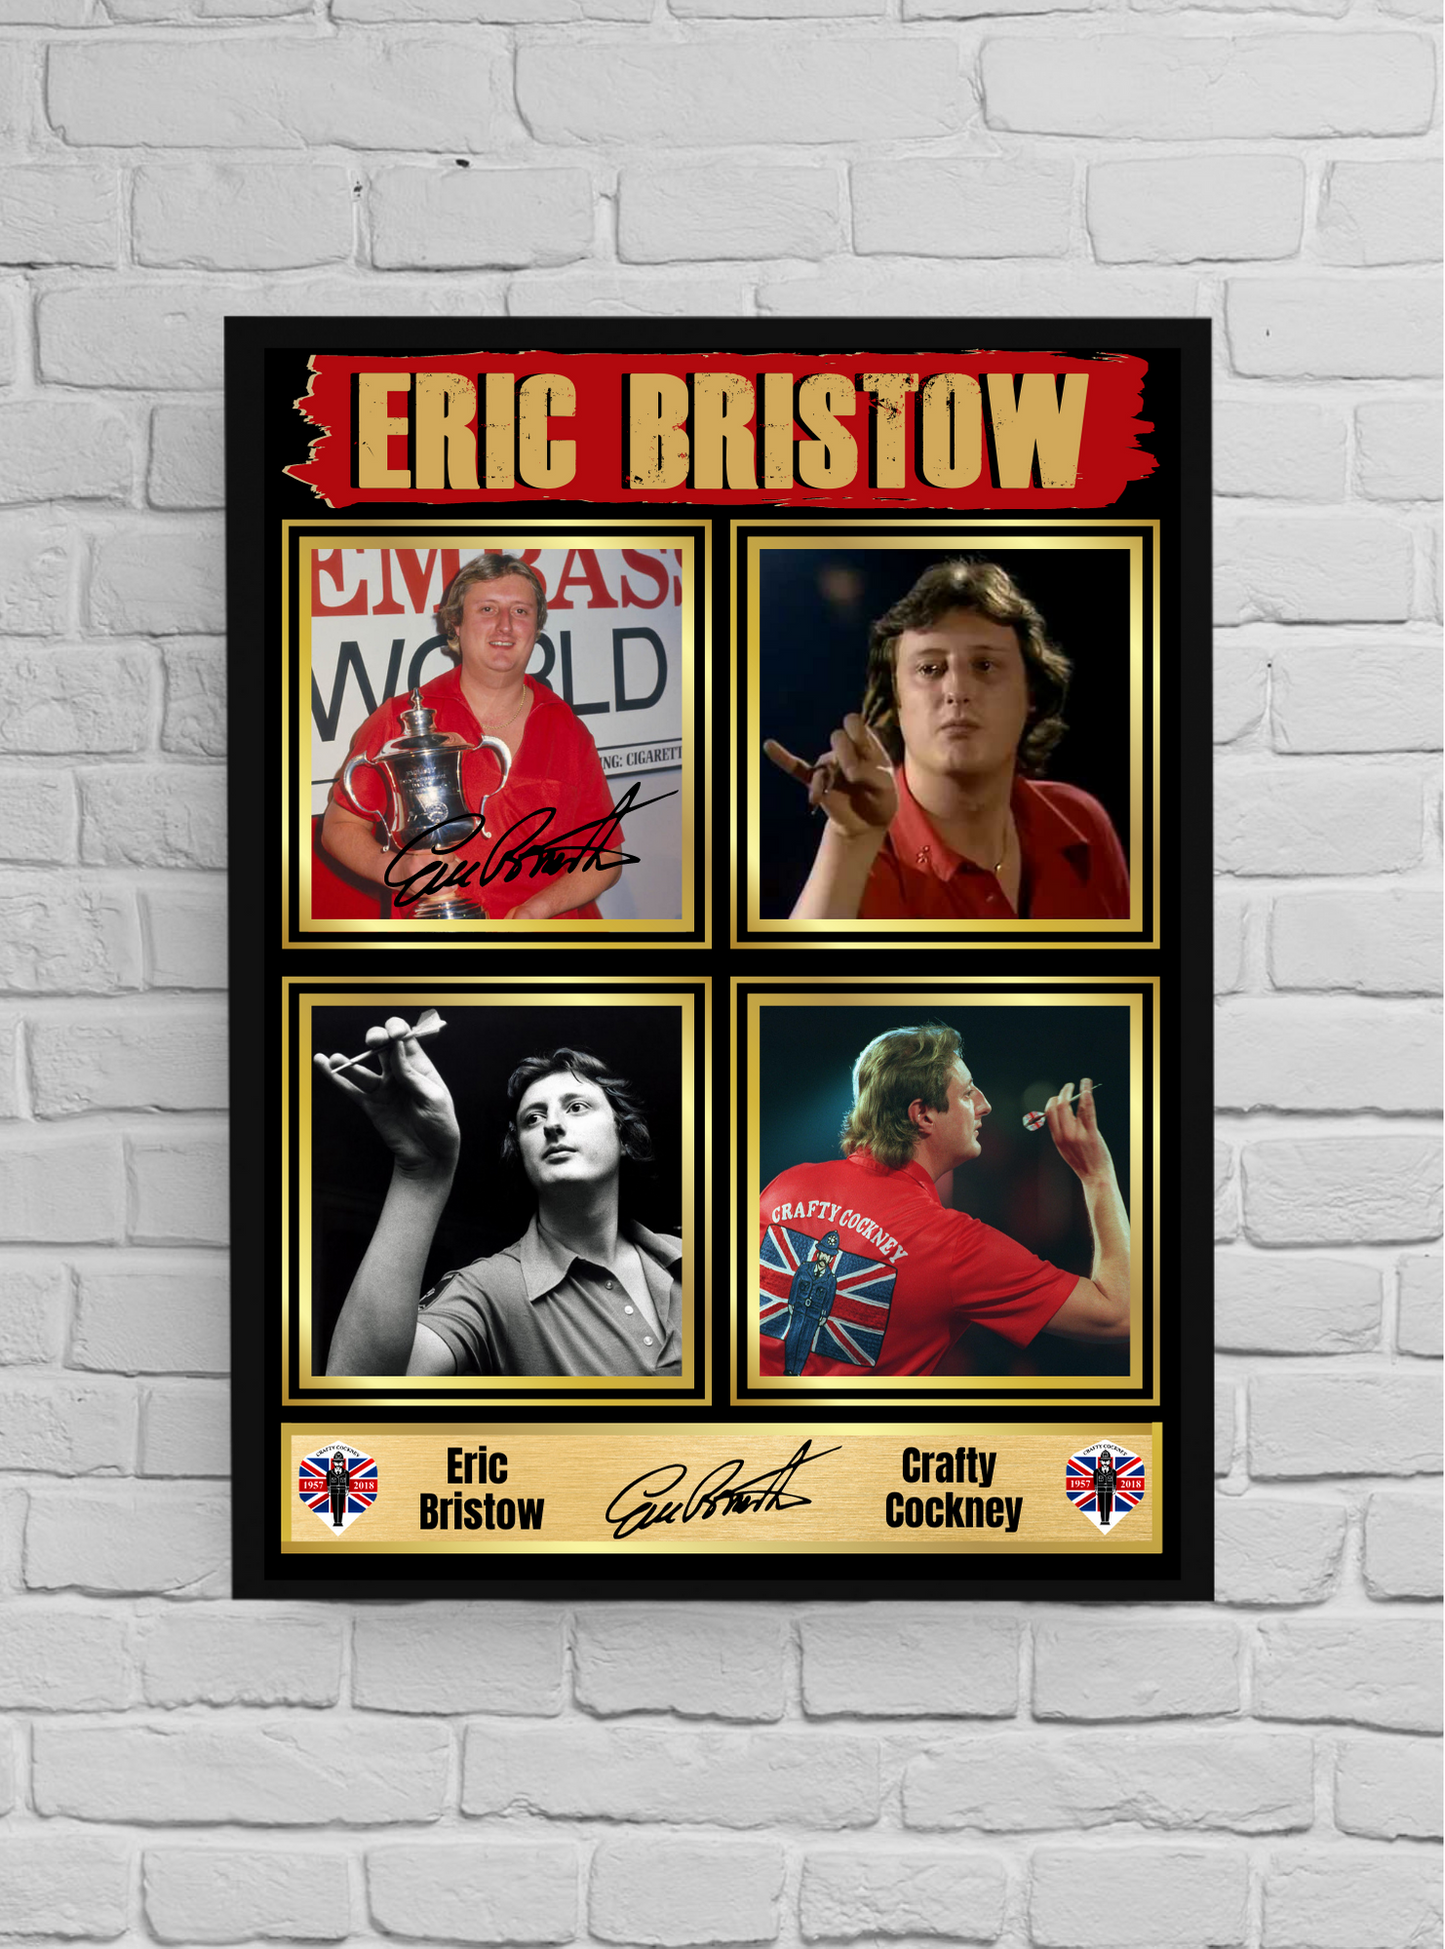 Eric Bristow The crafty cockney (Darts) #5 - Signed print